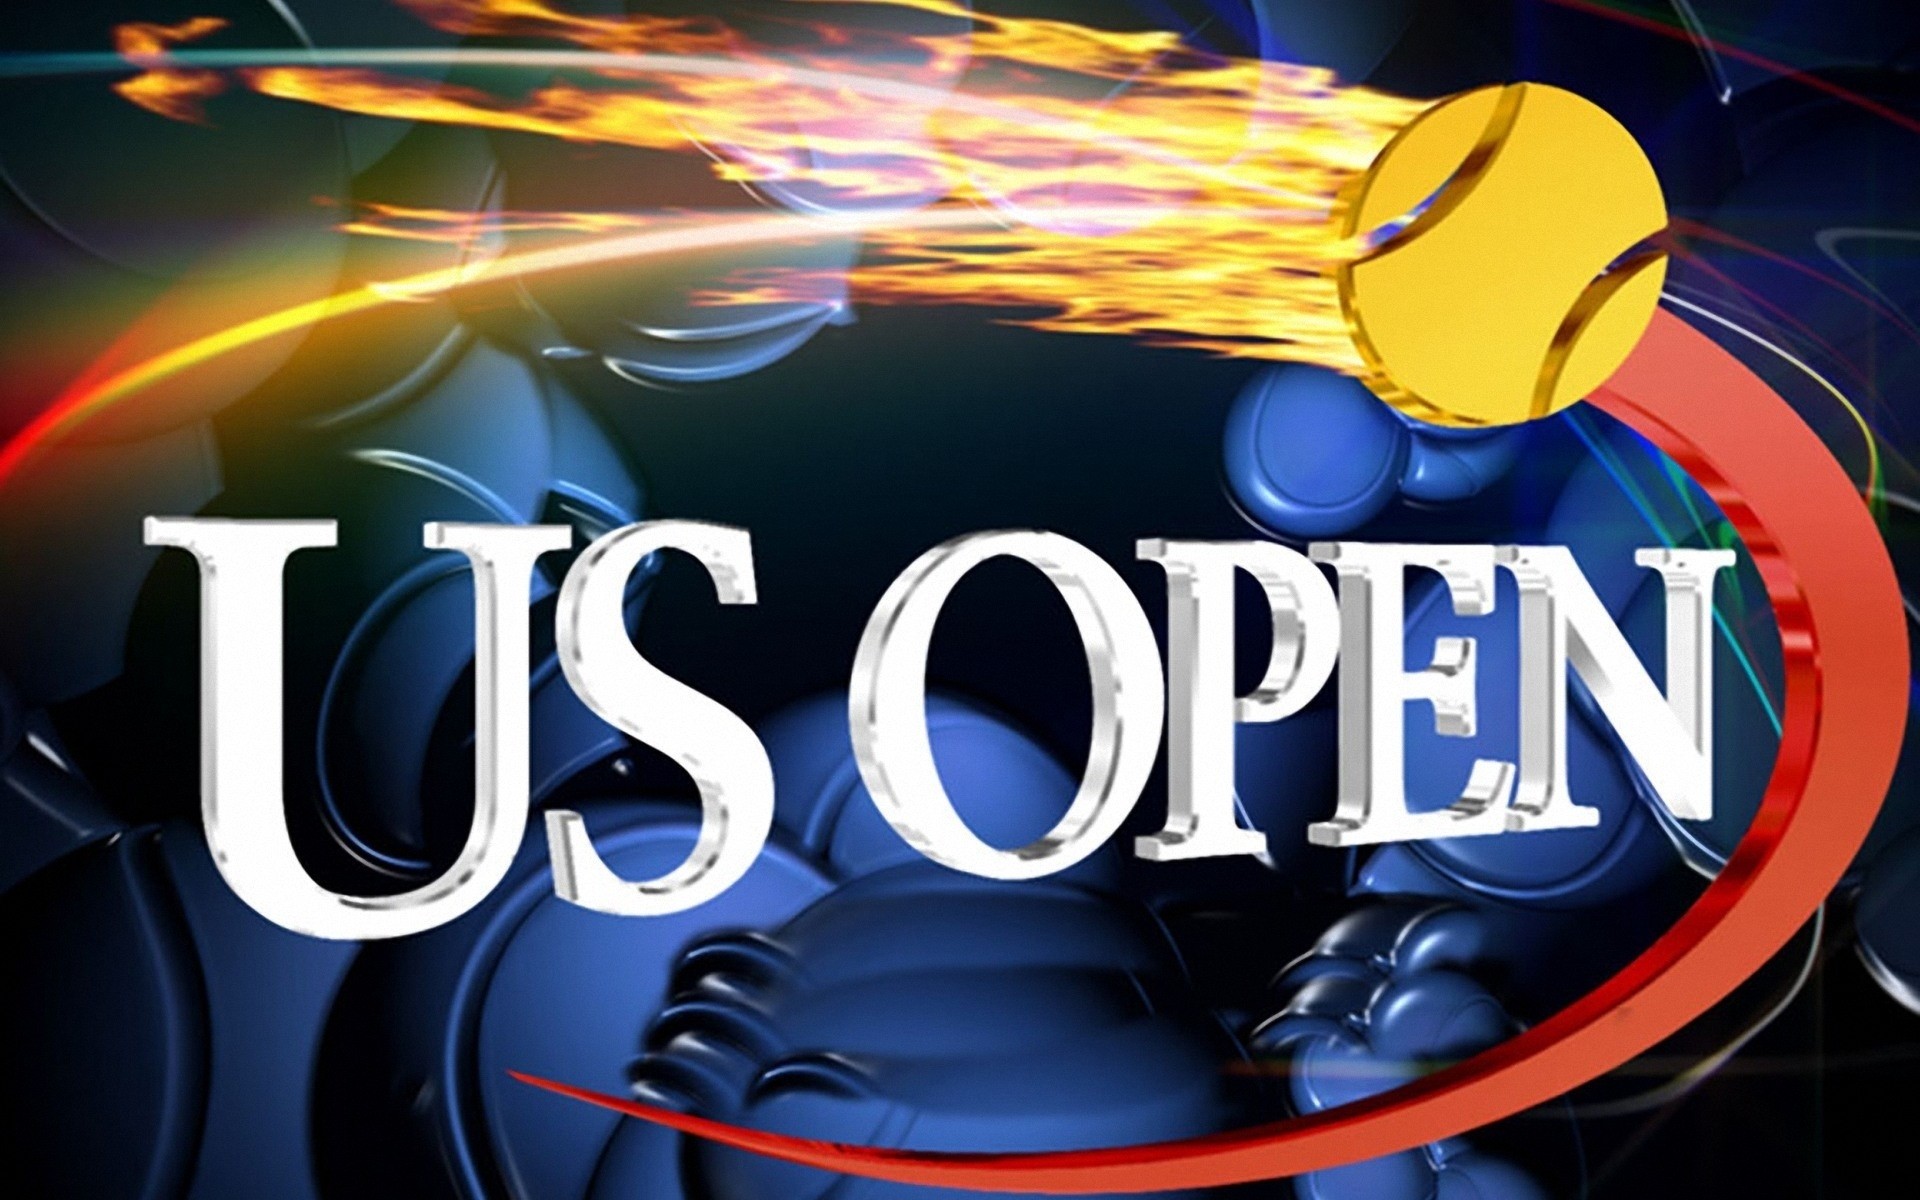 US Open Tennis Championship Tickets Shop for US Open Tennis